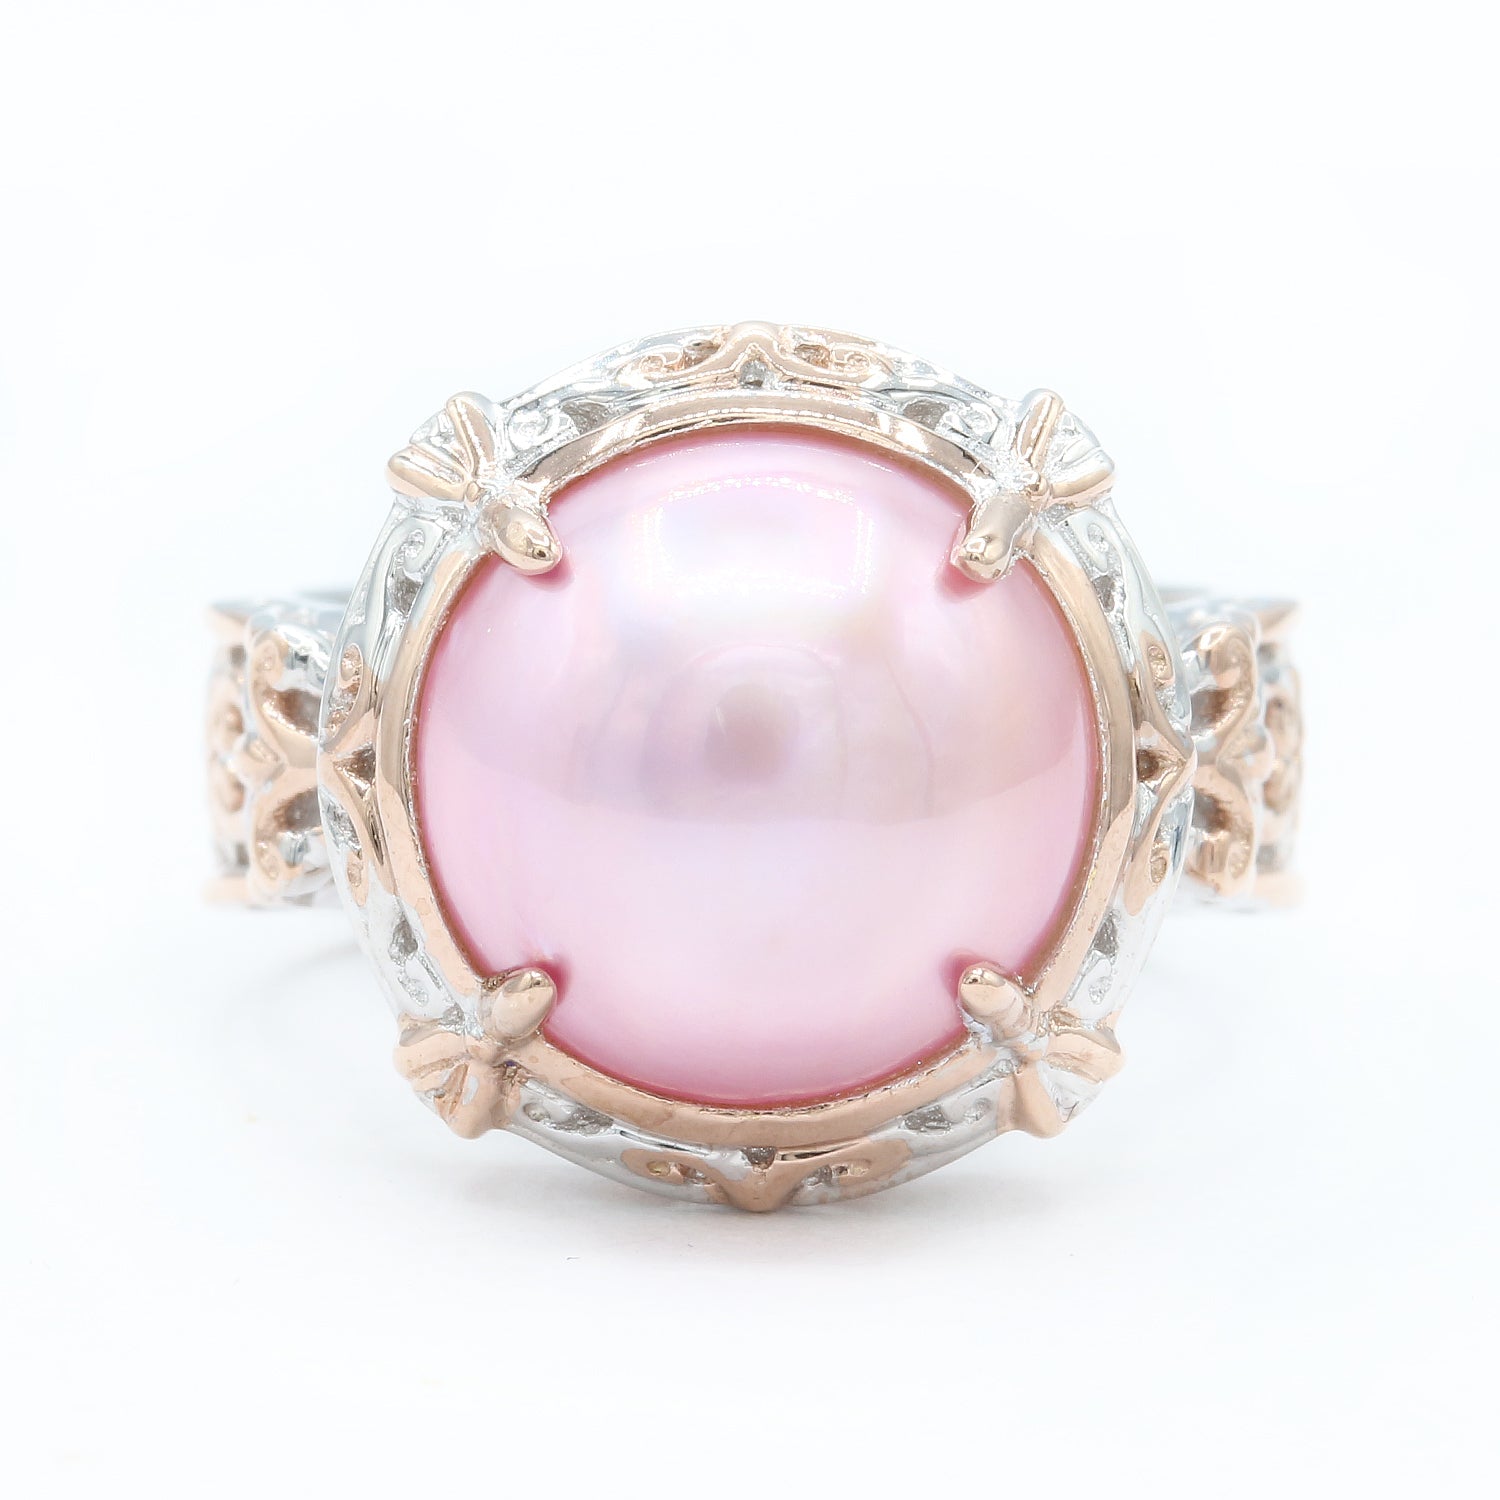 Gems en Vogue your choice of Seafoam Green or Pink Mabe Pearl Cultured Pearl Scrollwork Ring